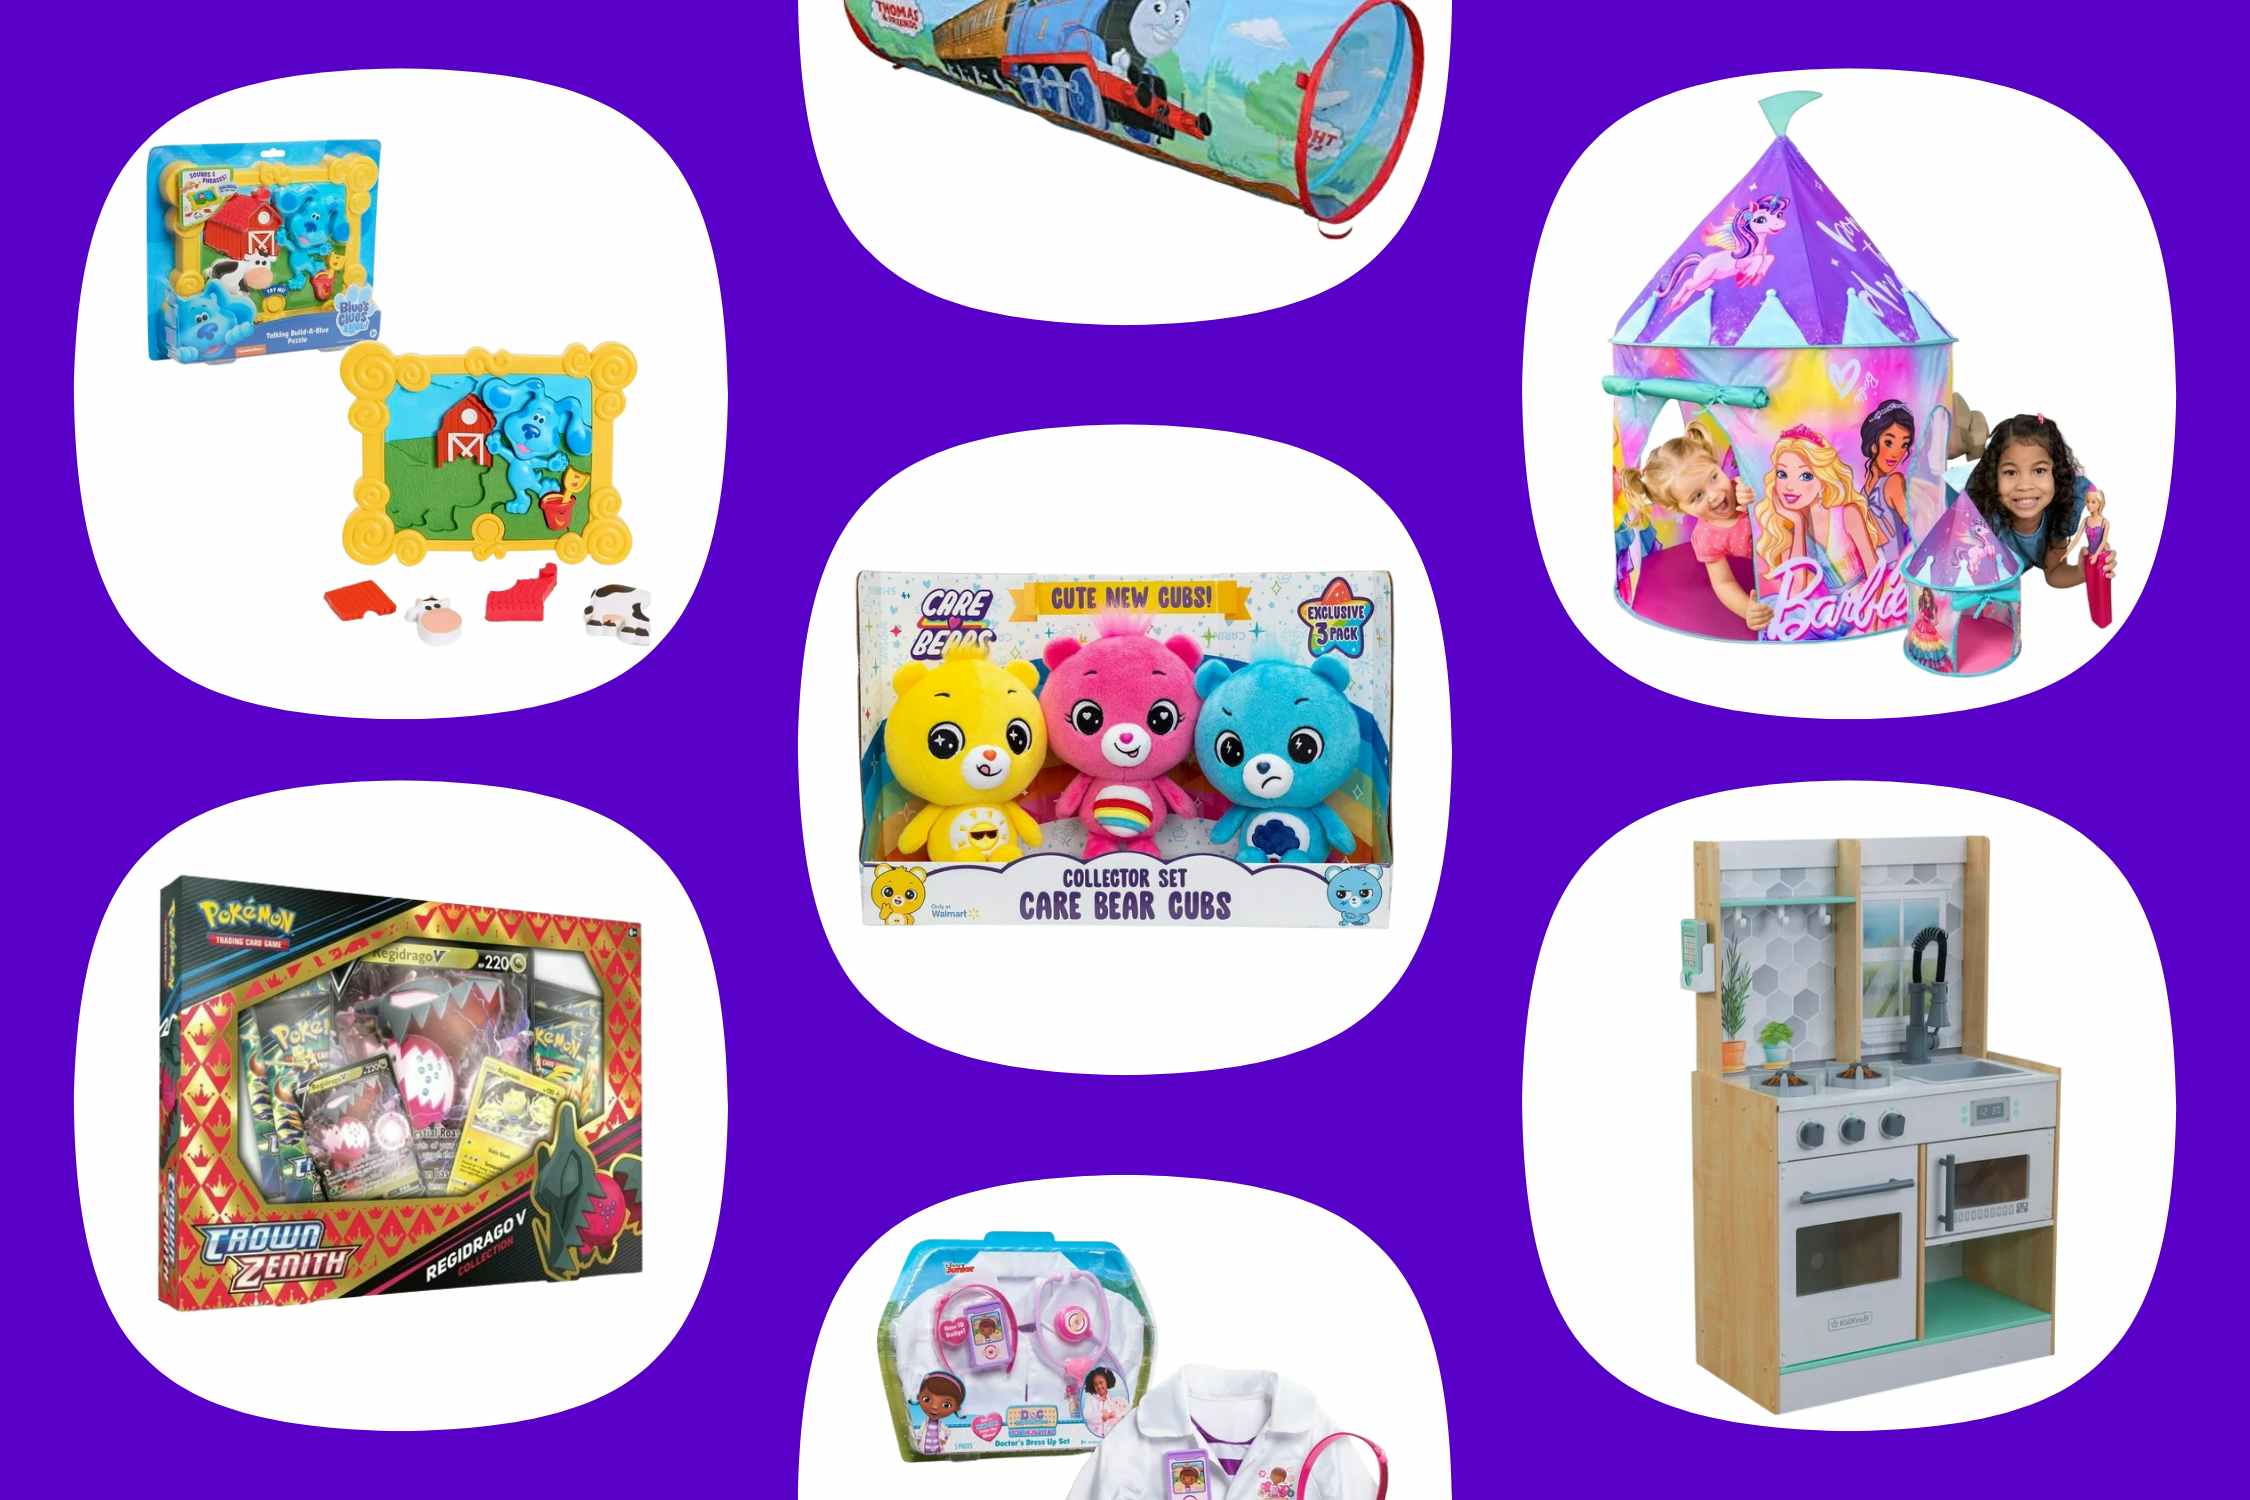 Walmart.com Toy Clearance: $6 Blue's Clues, $45 Play Kitchen, and More